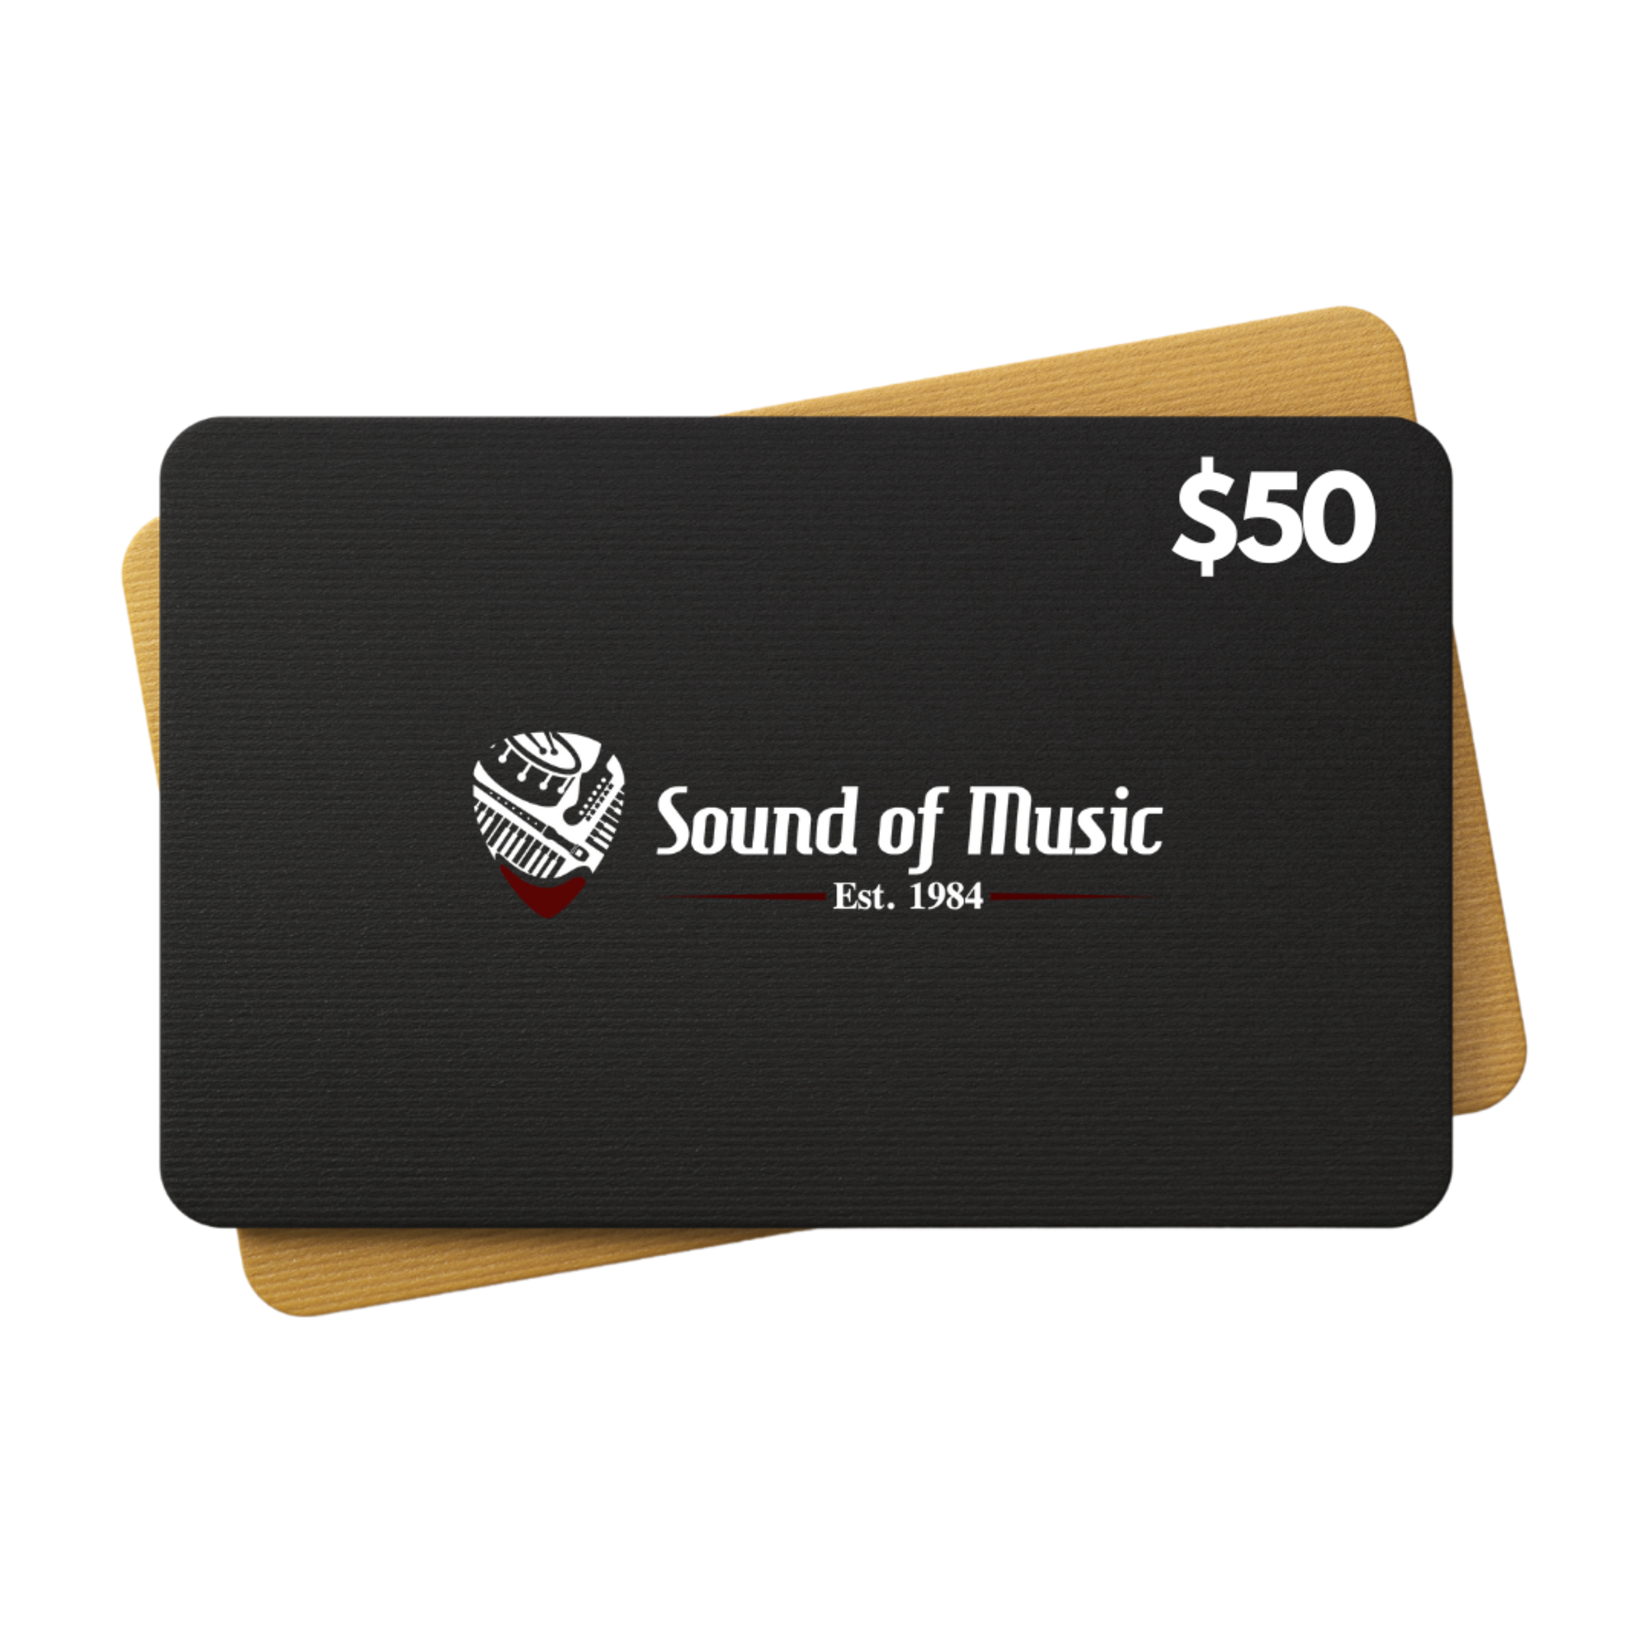 Sound of Music Gift Card - $50